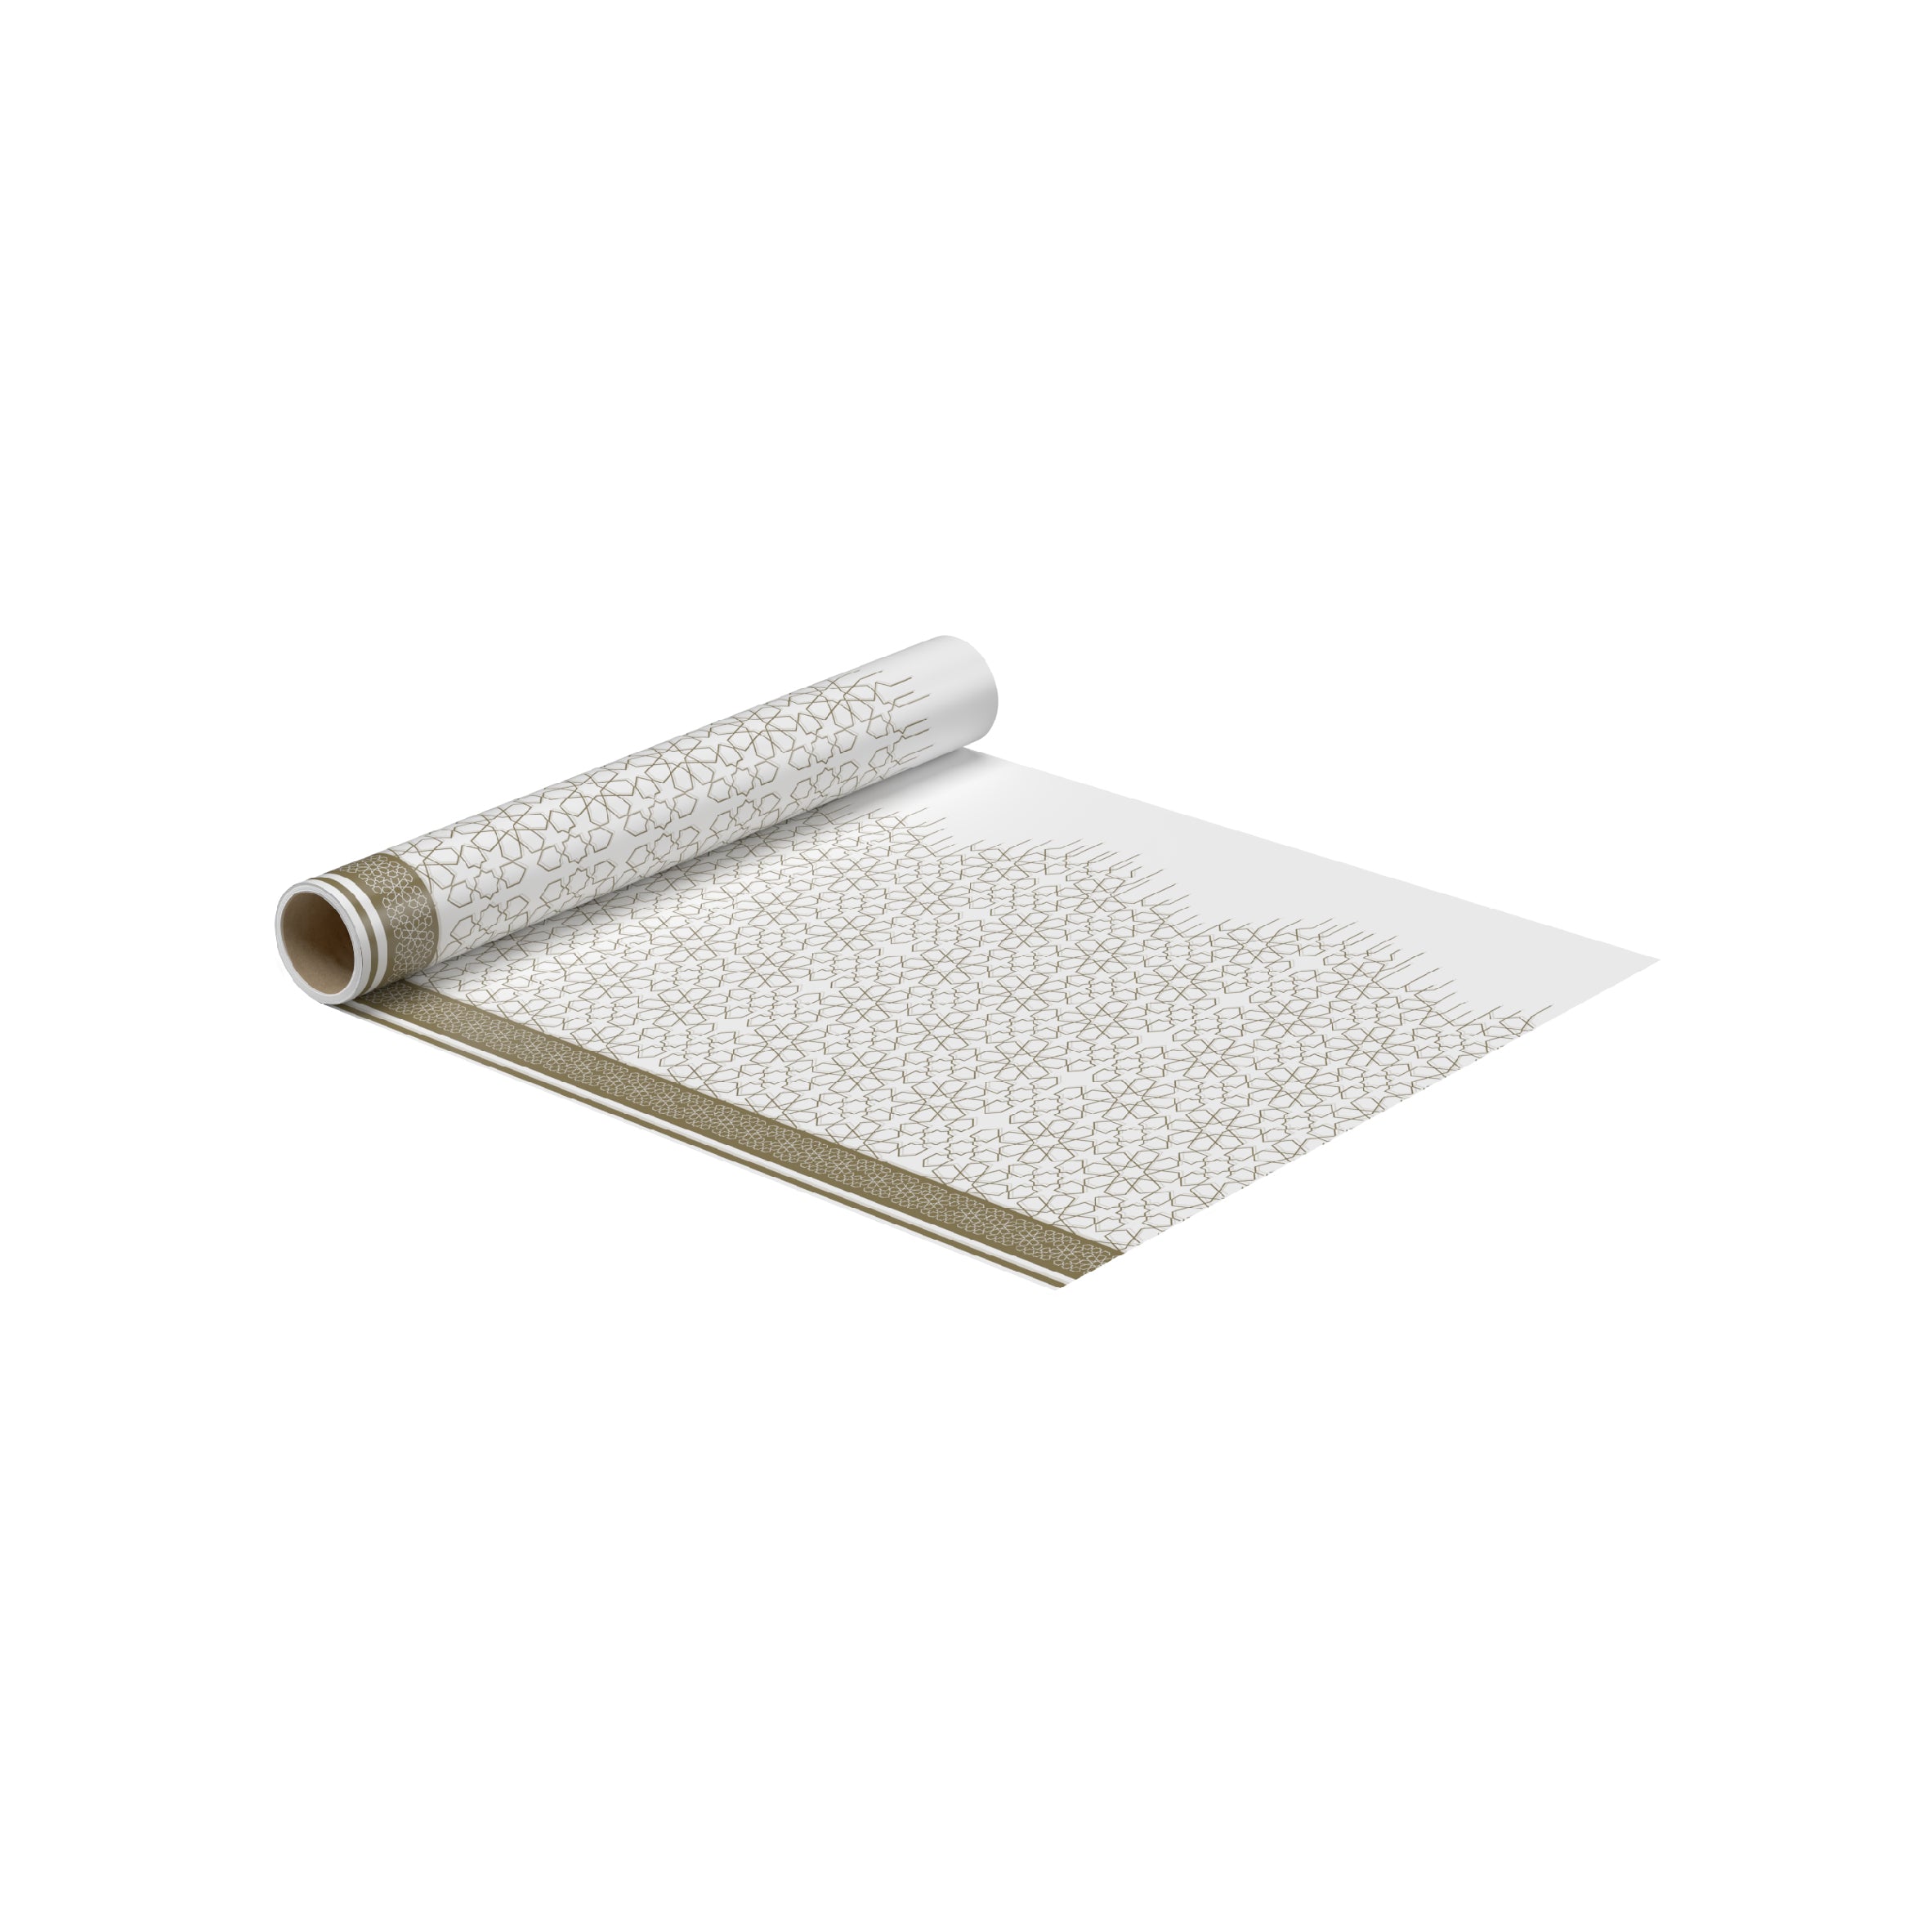 200 Pieces Perforated Sofra Roll 100cm x 120cm (10 roll)